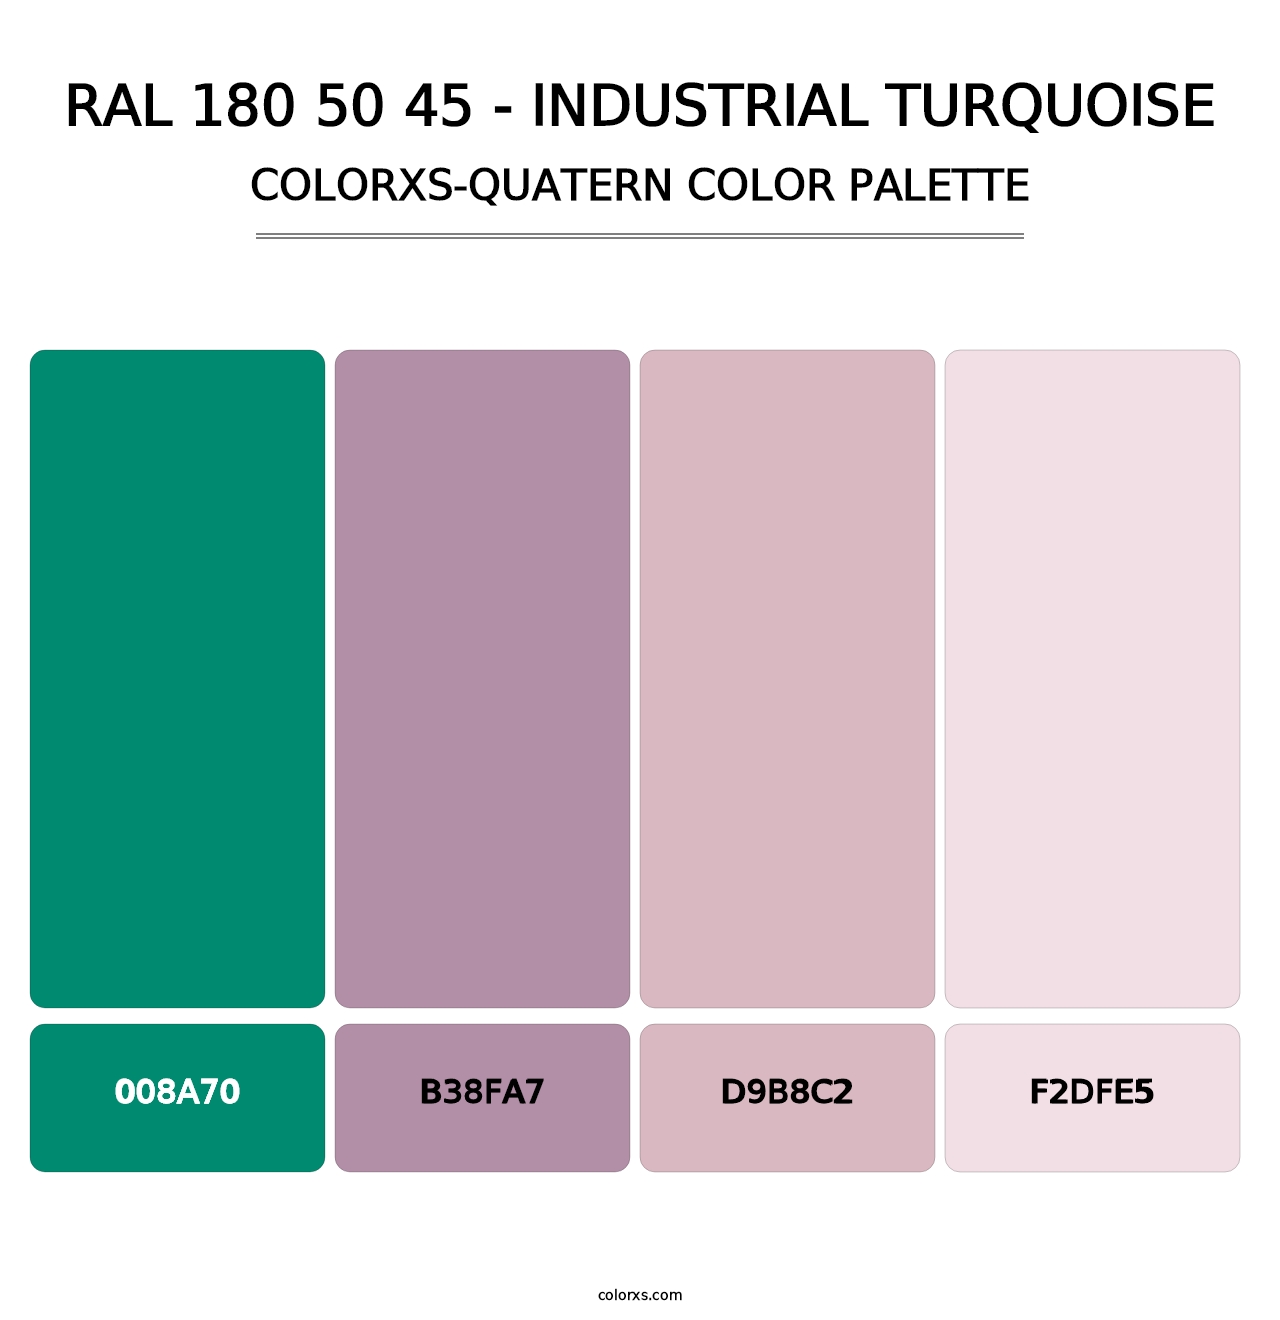 RAL 180 50 45 - Industrial Turquoise - Colorxs Quatern Palette